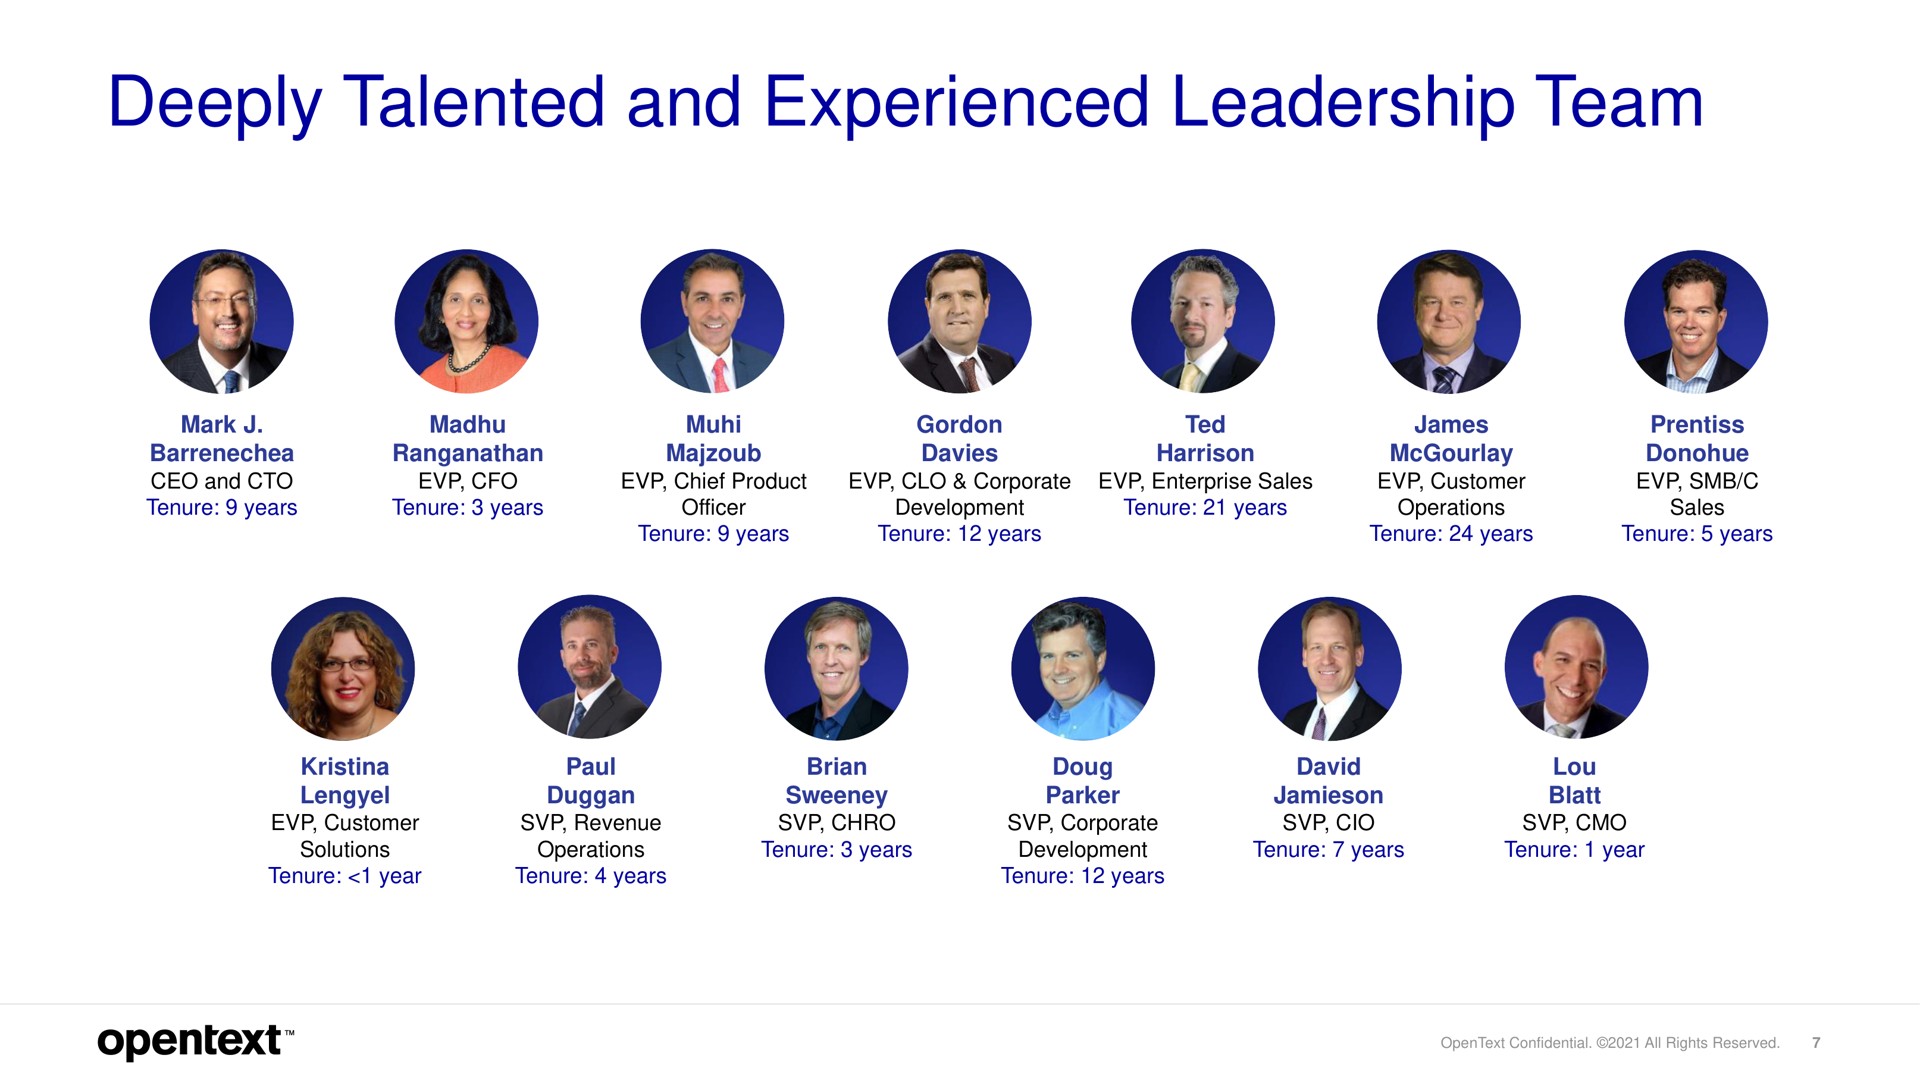 deeply talented and experienced leadership team | OpenText